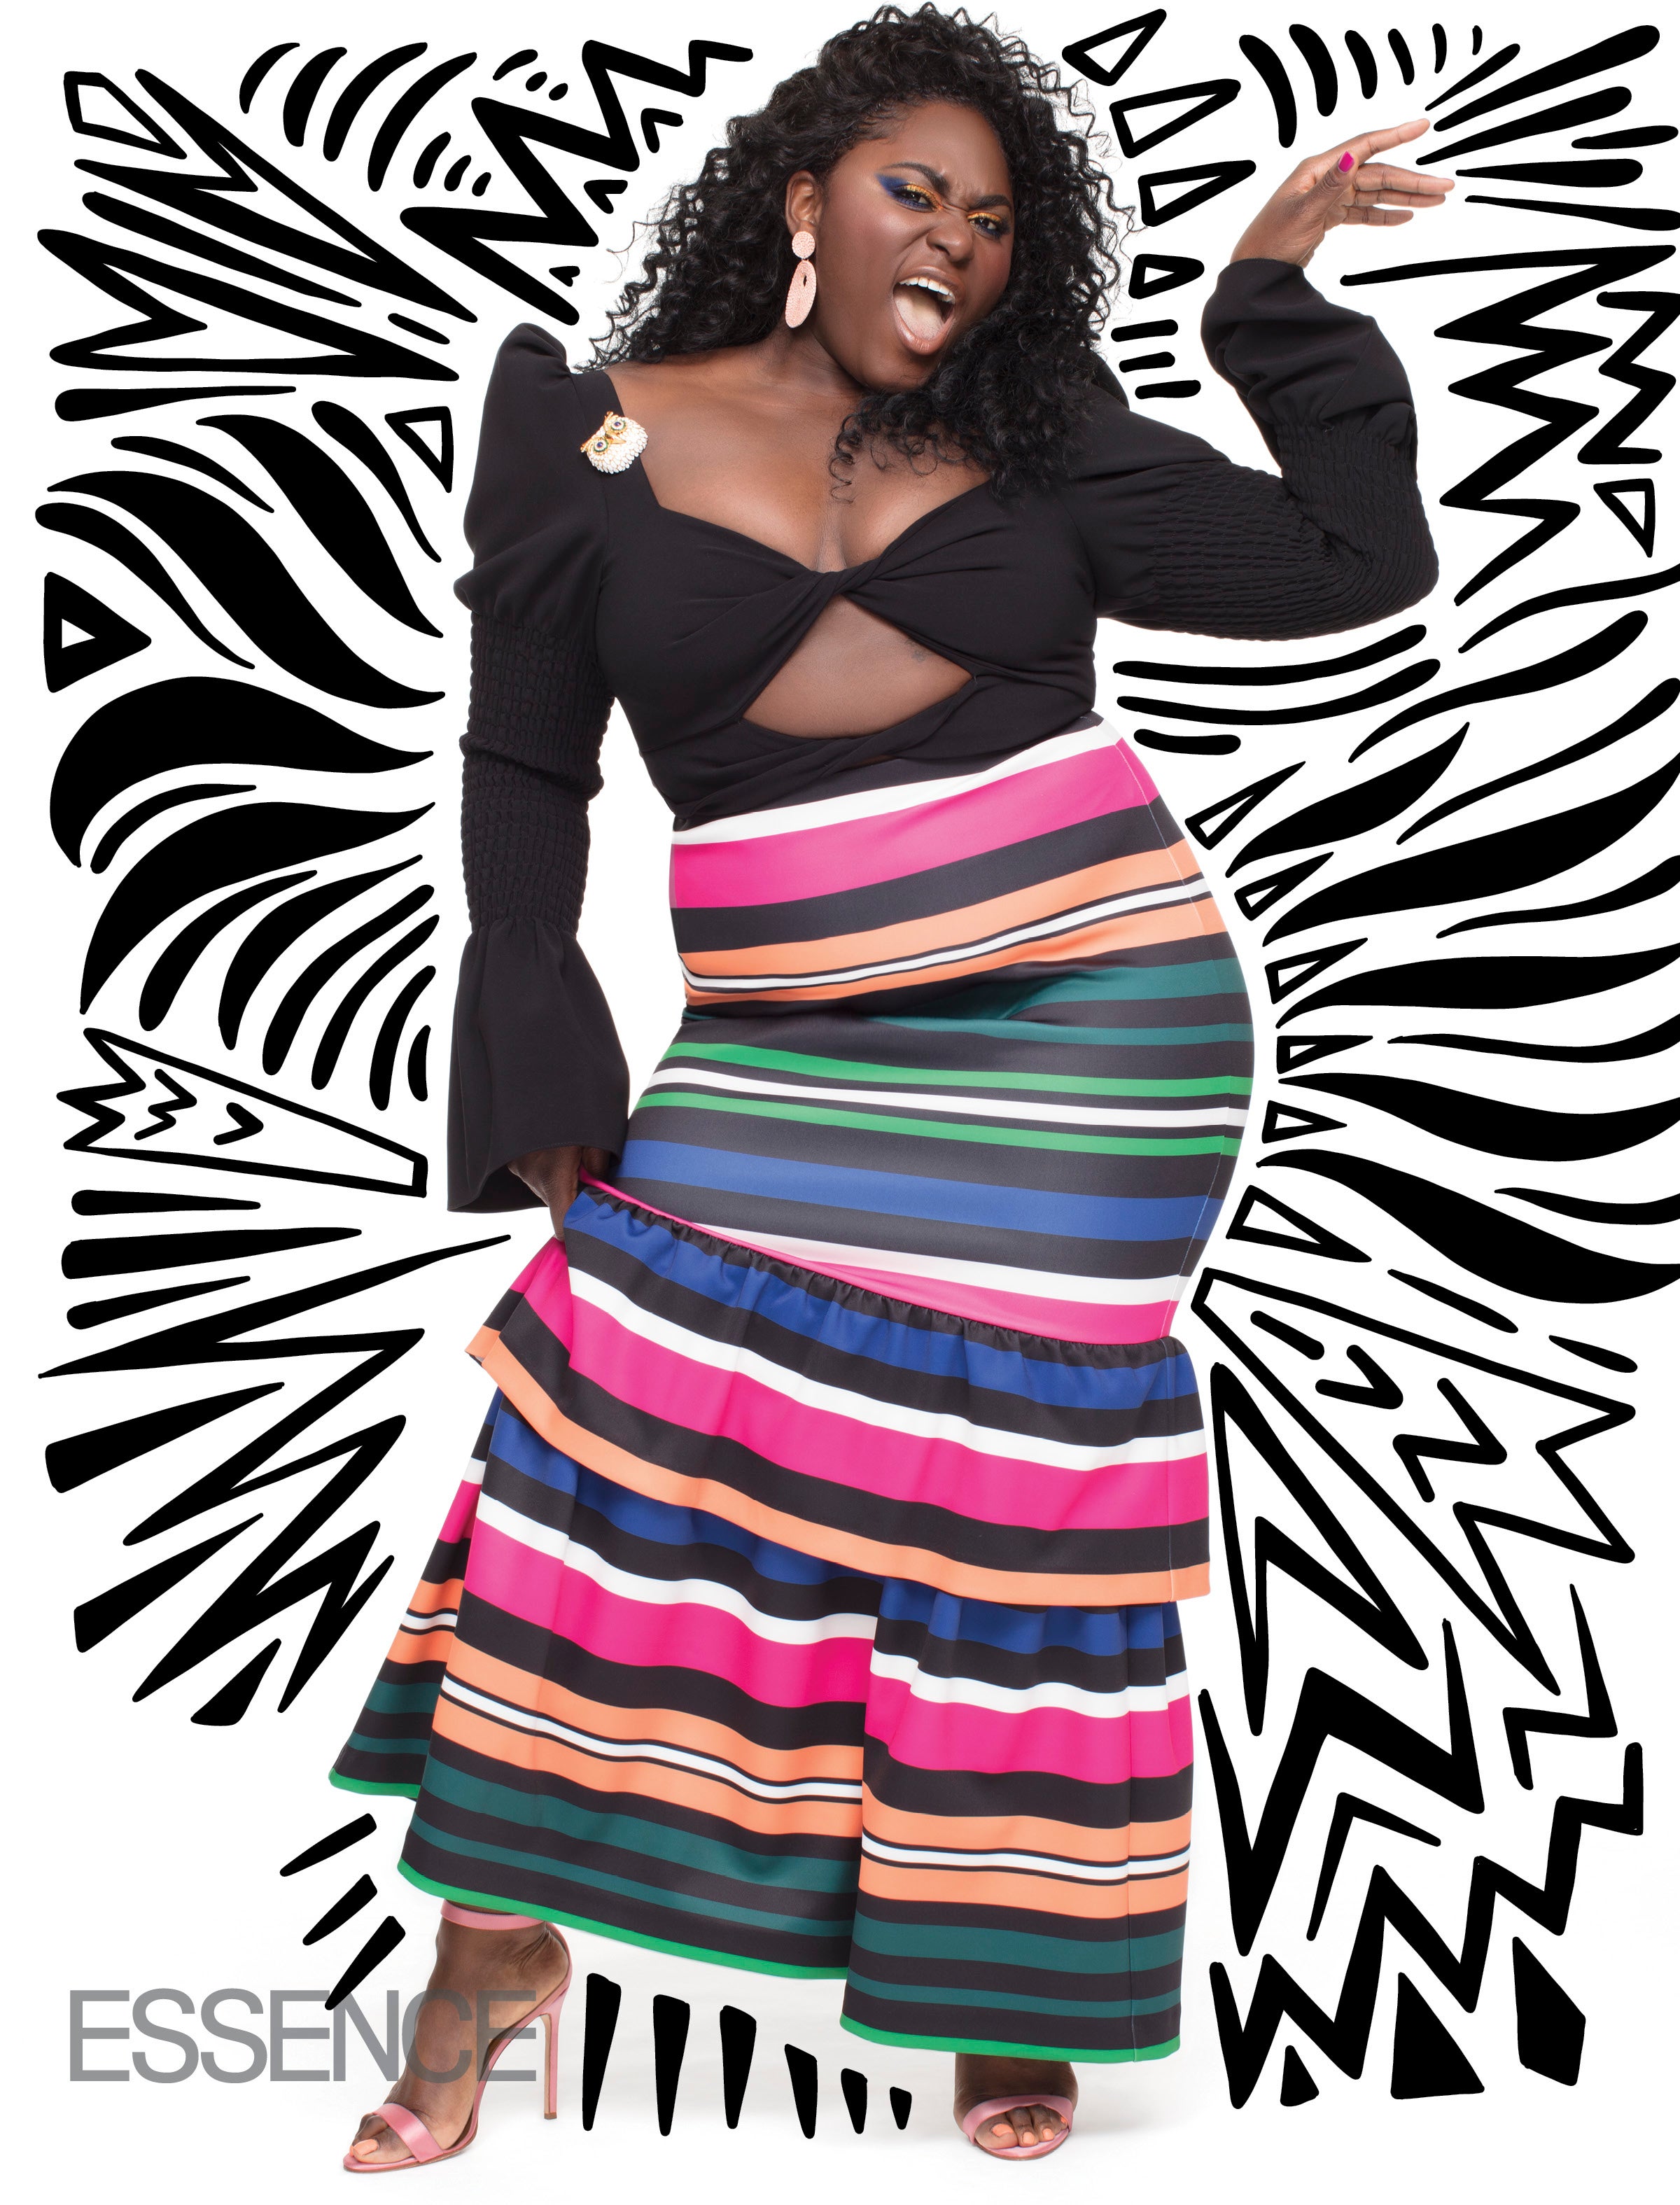 In Living Color: Danielle Brooks Is As Vibrant And Stylish As These Amazingly Loud Spring Looks
